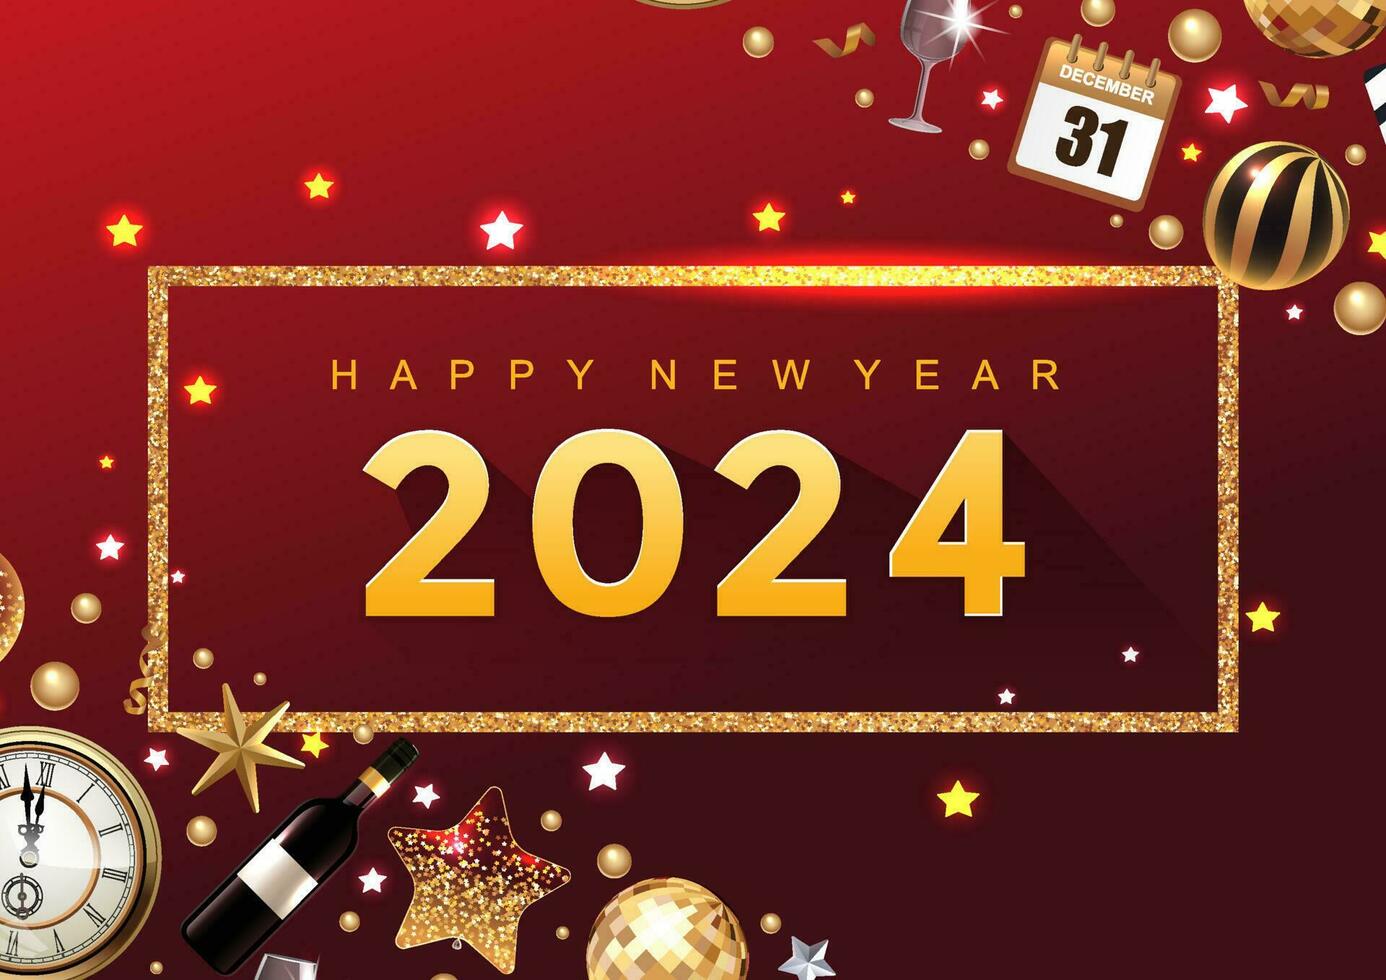 Happy New Year 2024 elegant luxury greeting card, banner, or poster design template with red Christmas ornament ball and gold confetti. Vector illustration